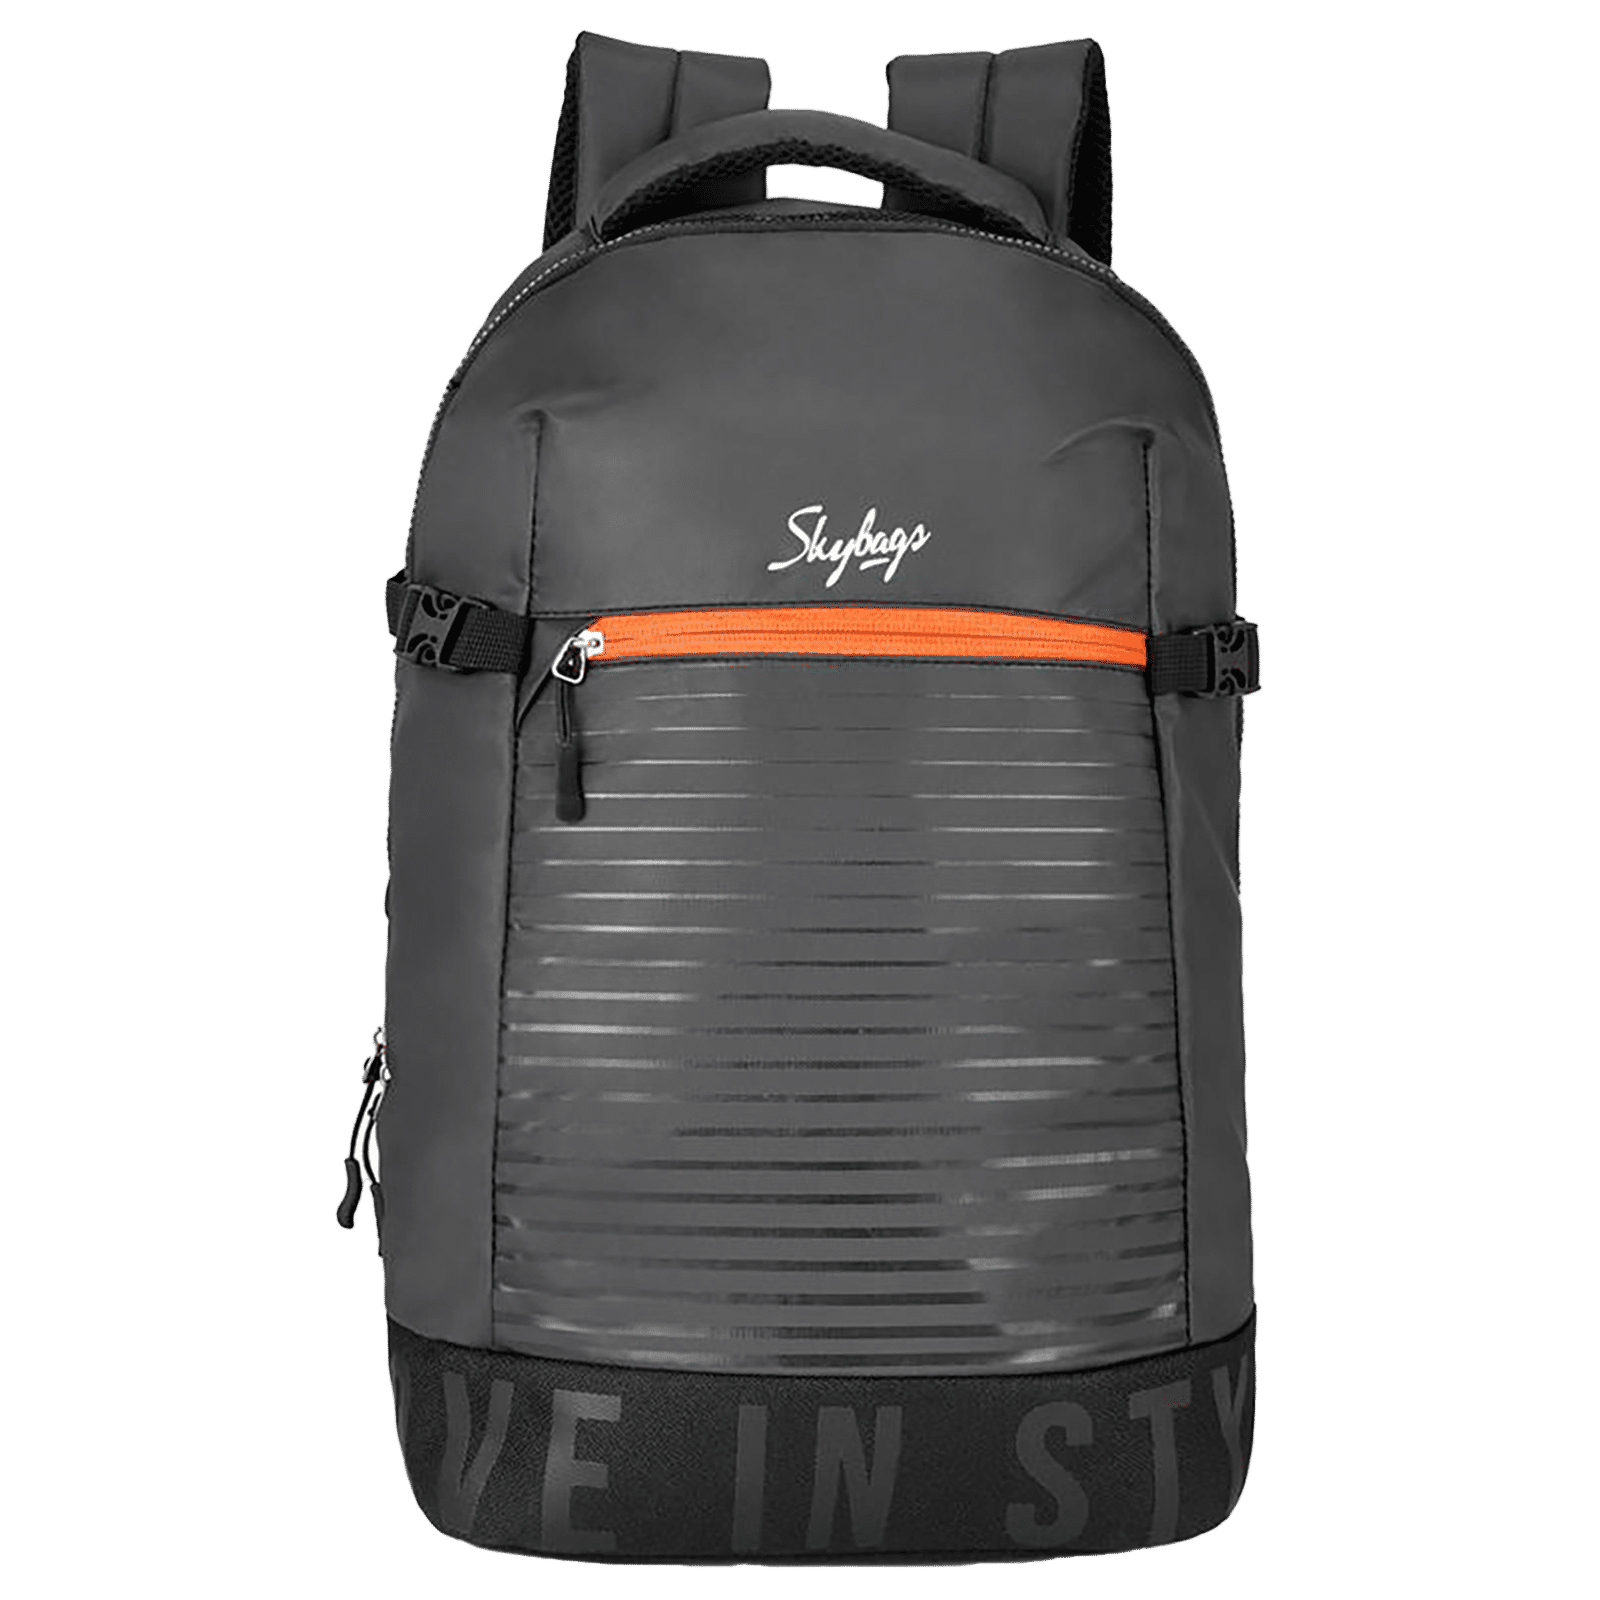 Buy Skybags Raider 25 Ltrs Blue Casual Backpack (RAID02BLU) at Amazon.in